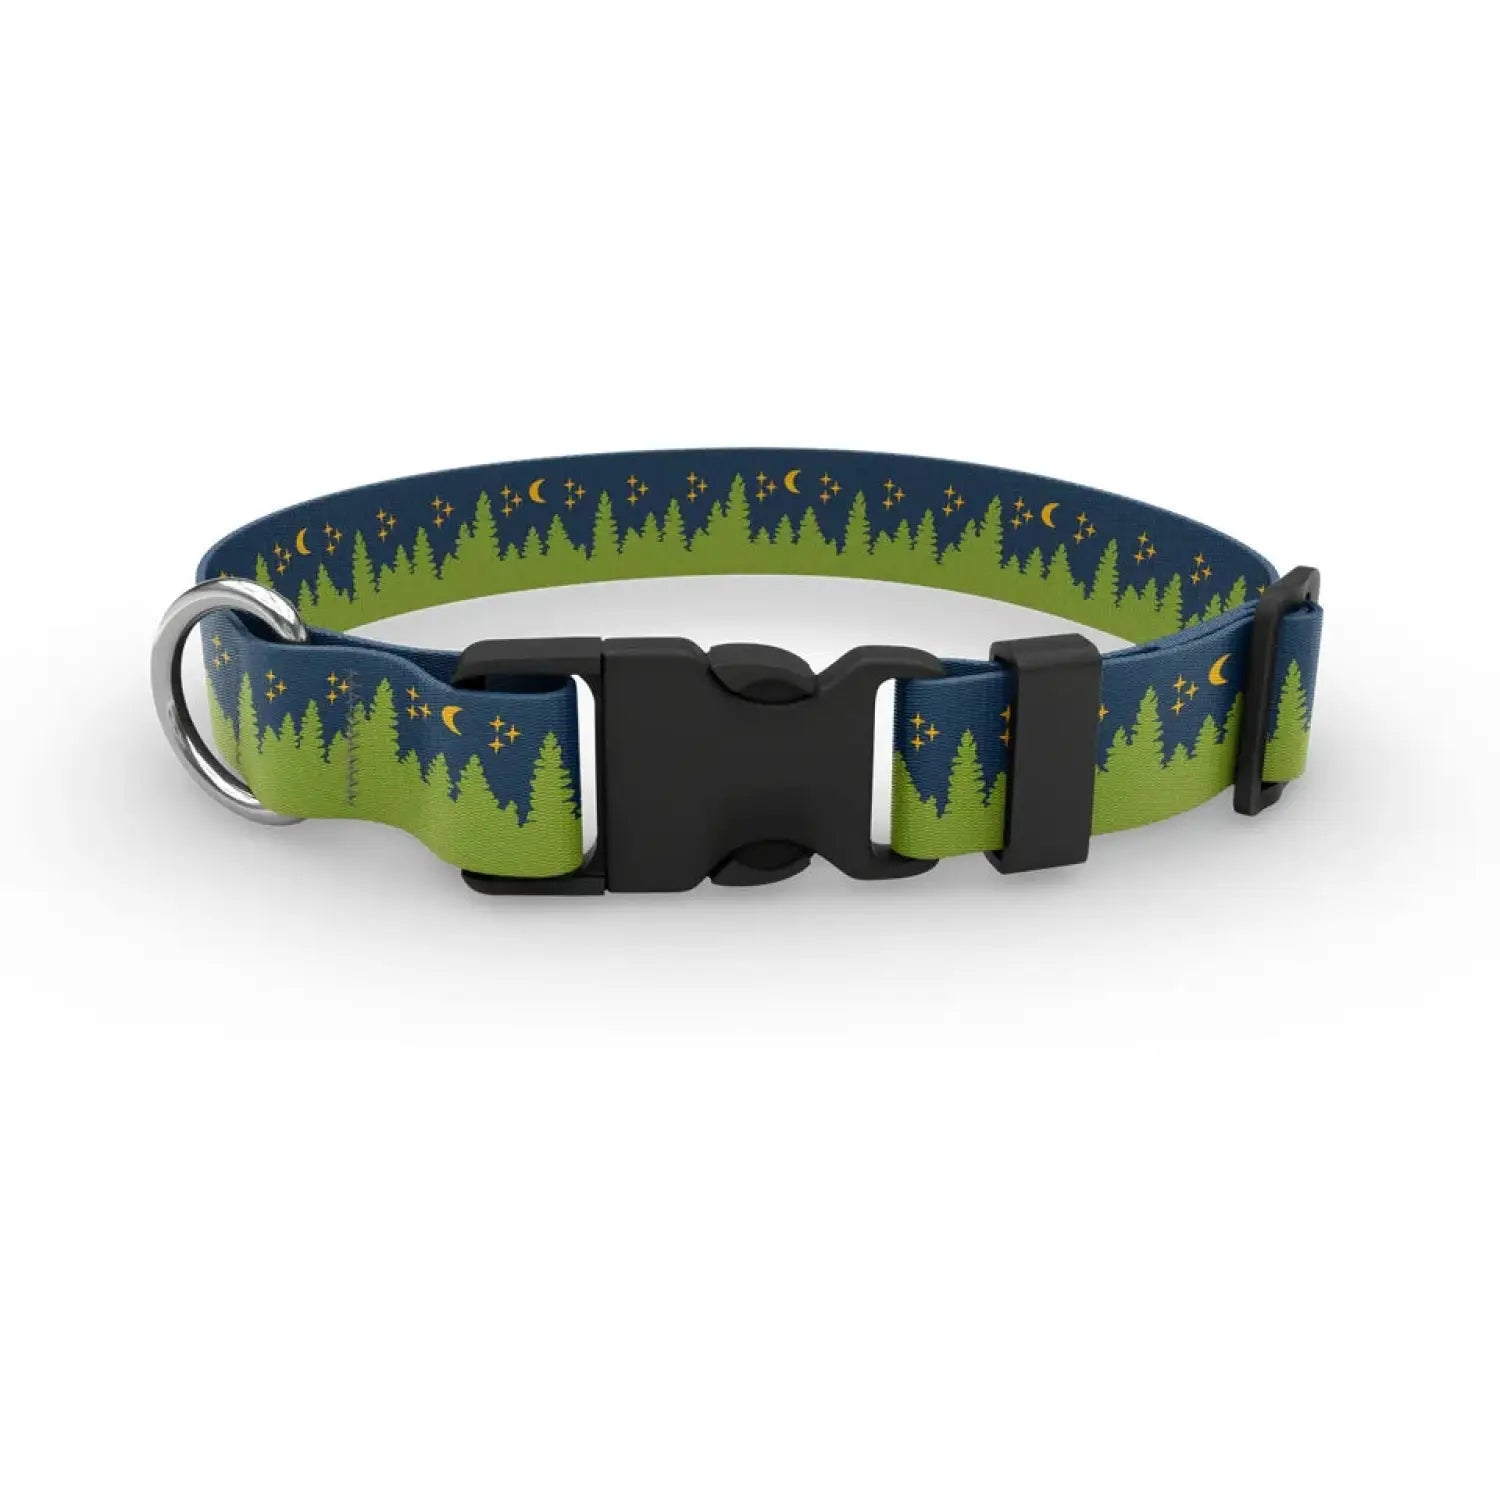 Wingo Outdoors Dog Collar in Under the Stars design, with green trees and dark blue sky with yellow stars.  Black buckle and silver D ring.